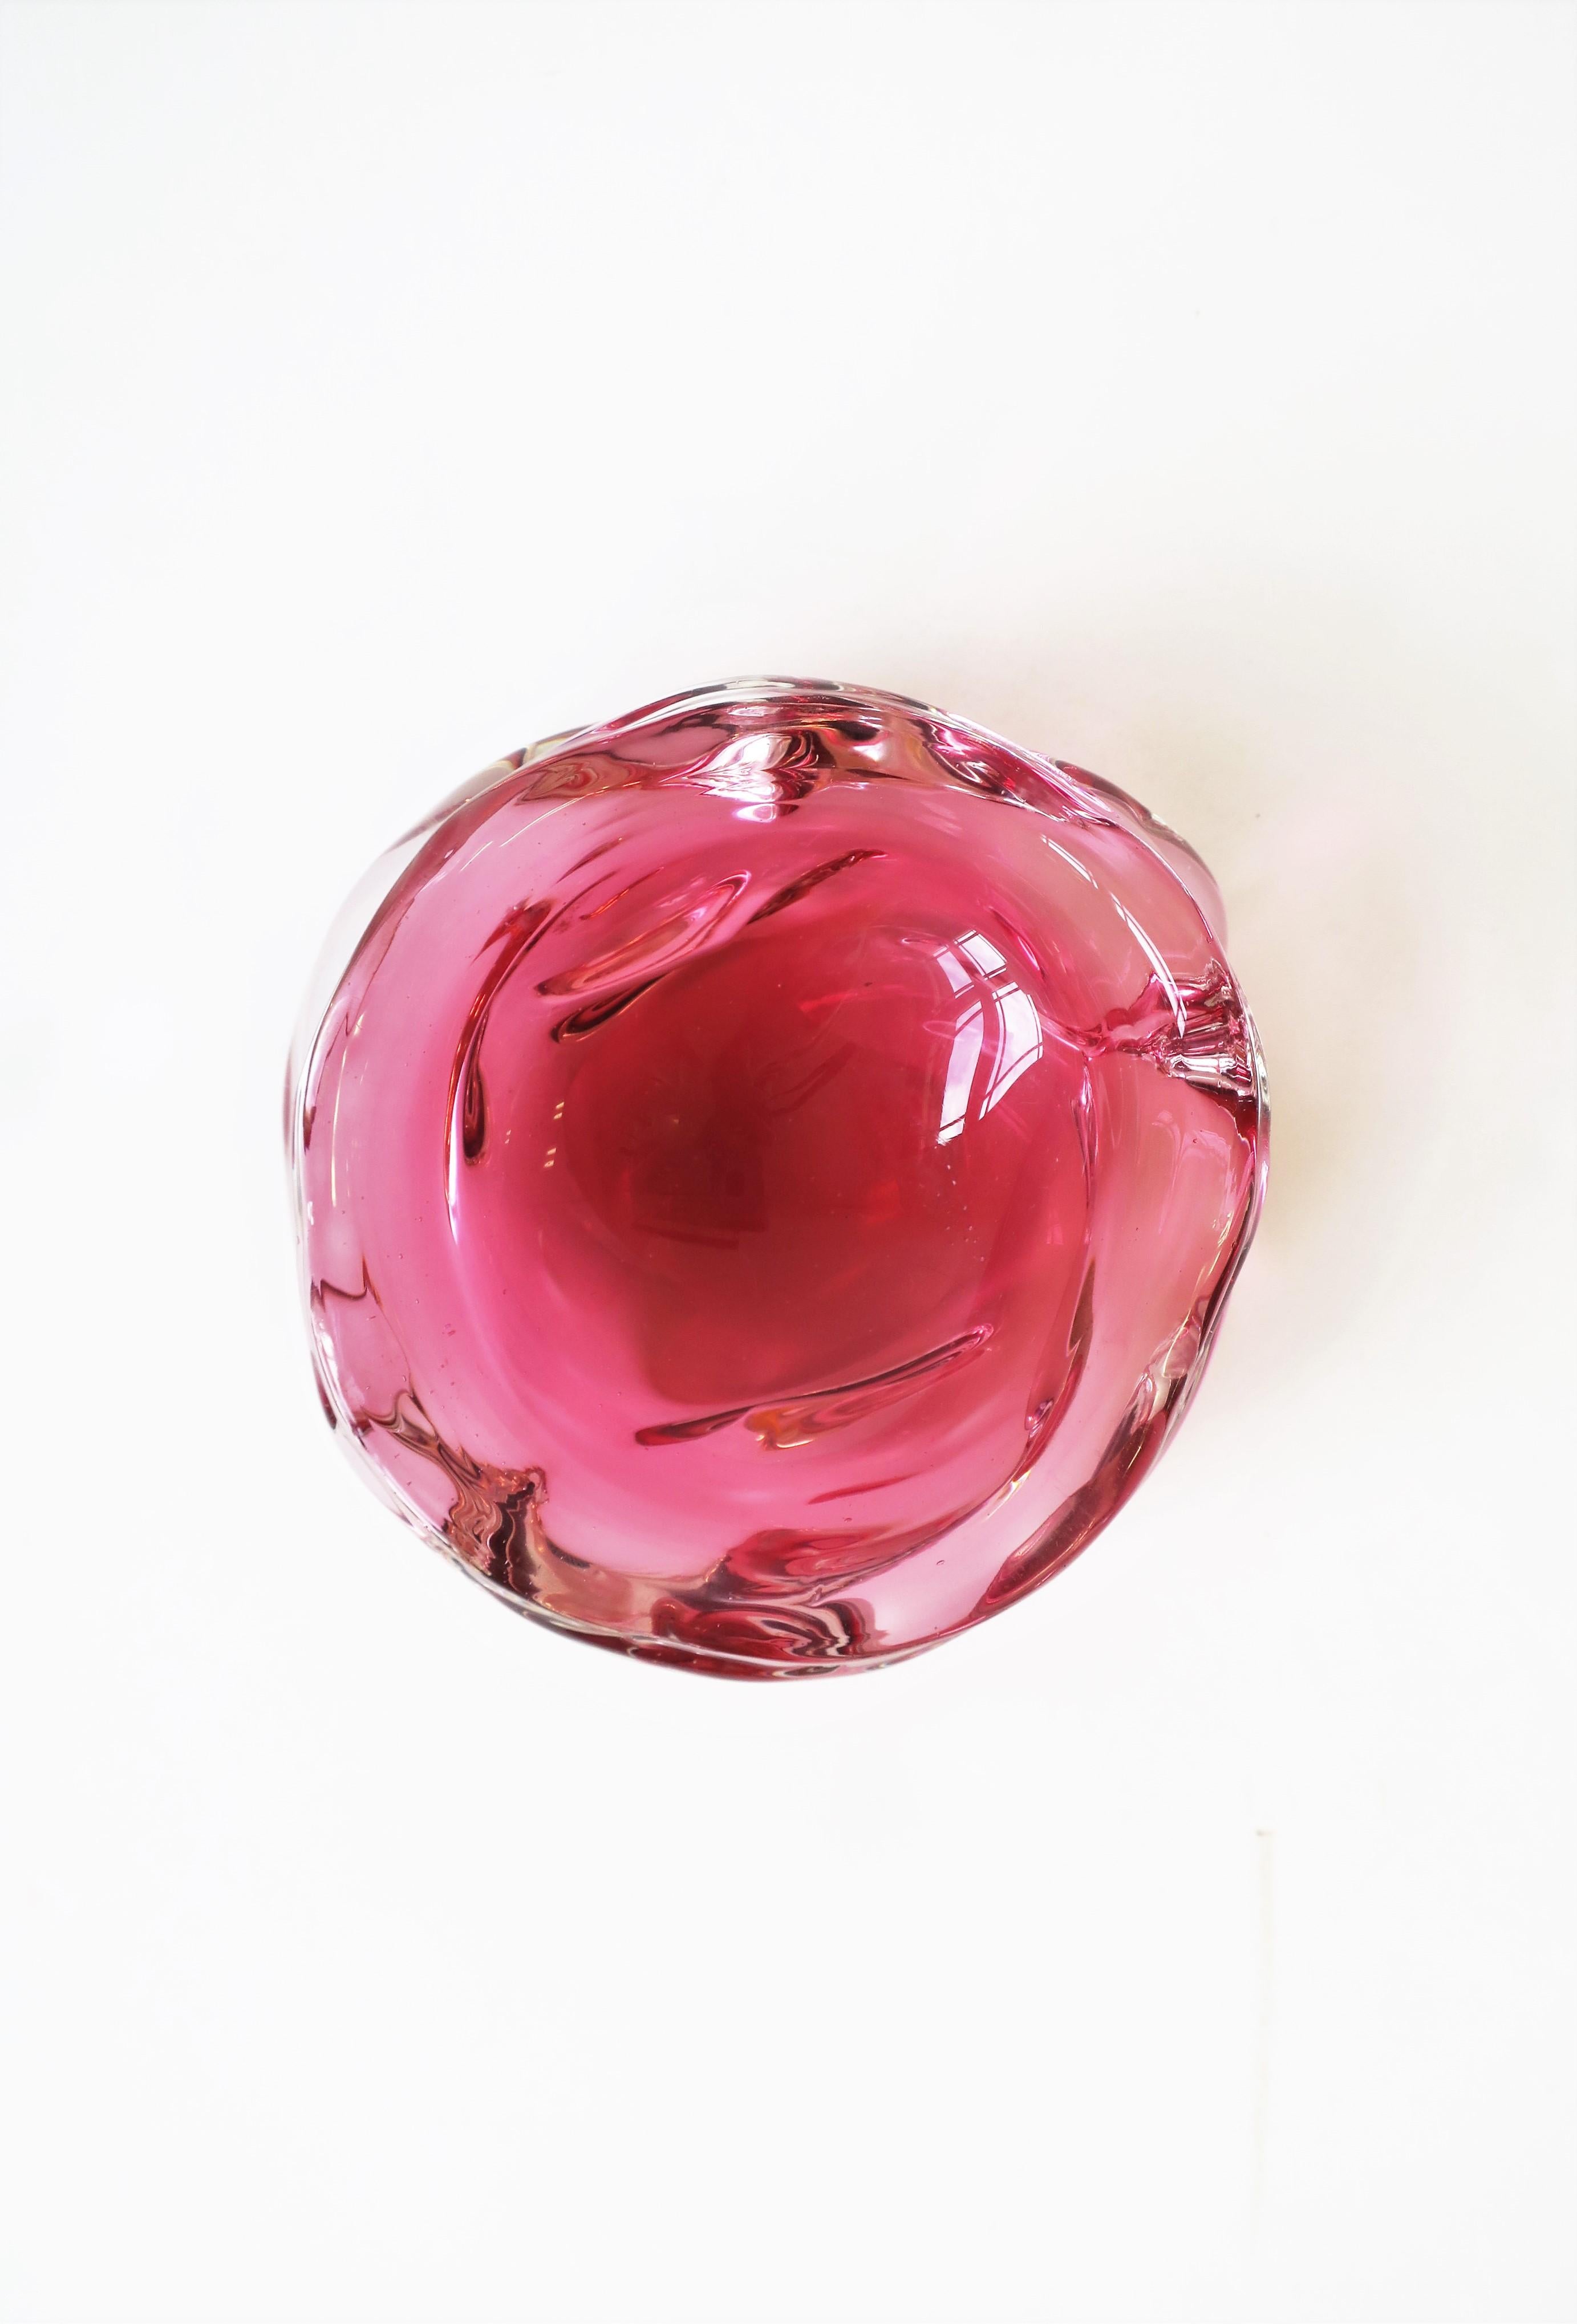 A beautiful and substantial Italian Murano bowl made in a red raspberry/deep pink and clear art glass, with soft edges in an organic modern form/style, circa mid-20th century, Italy. Bowl measures: 1.88